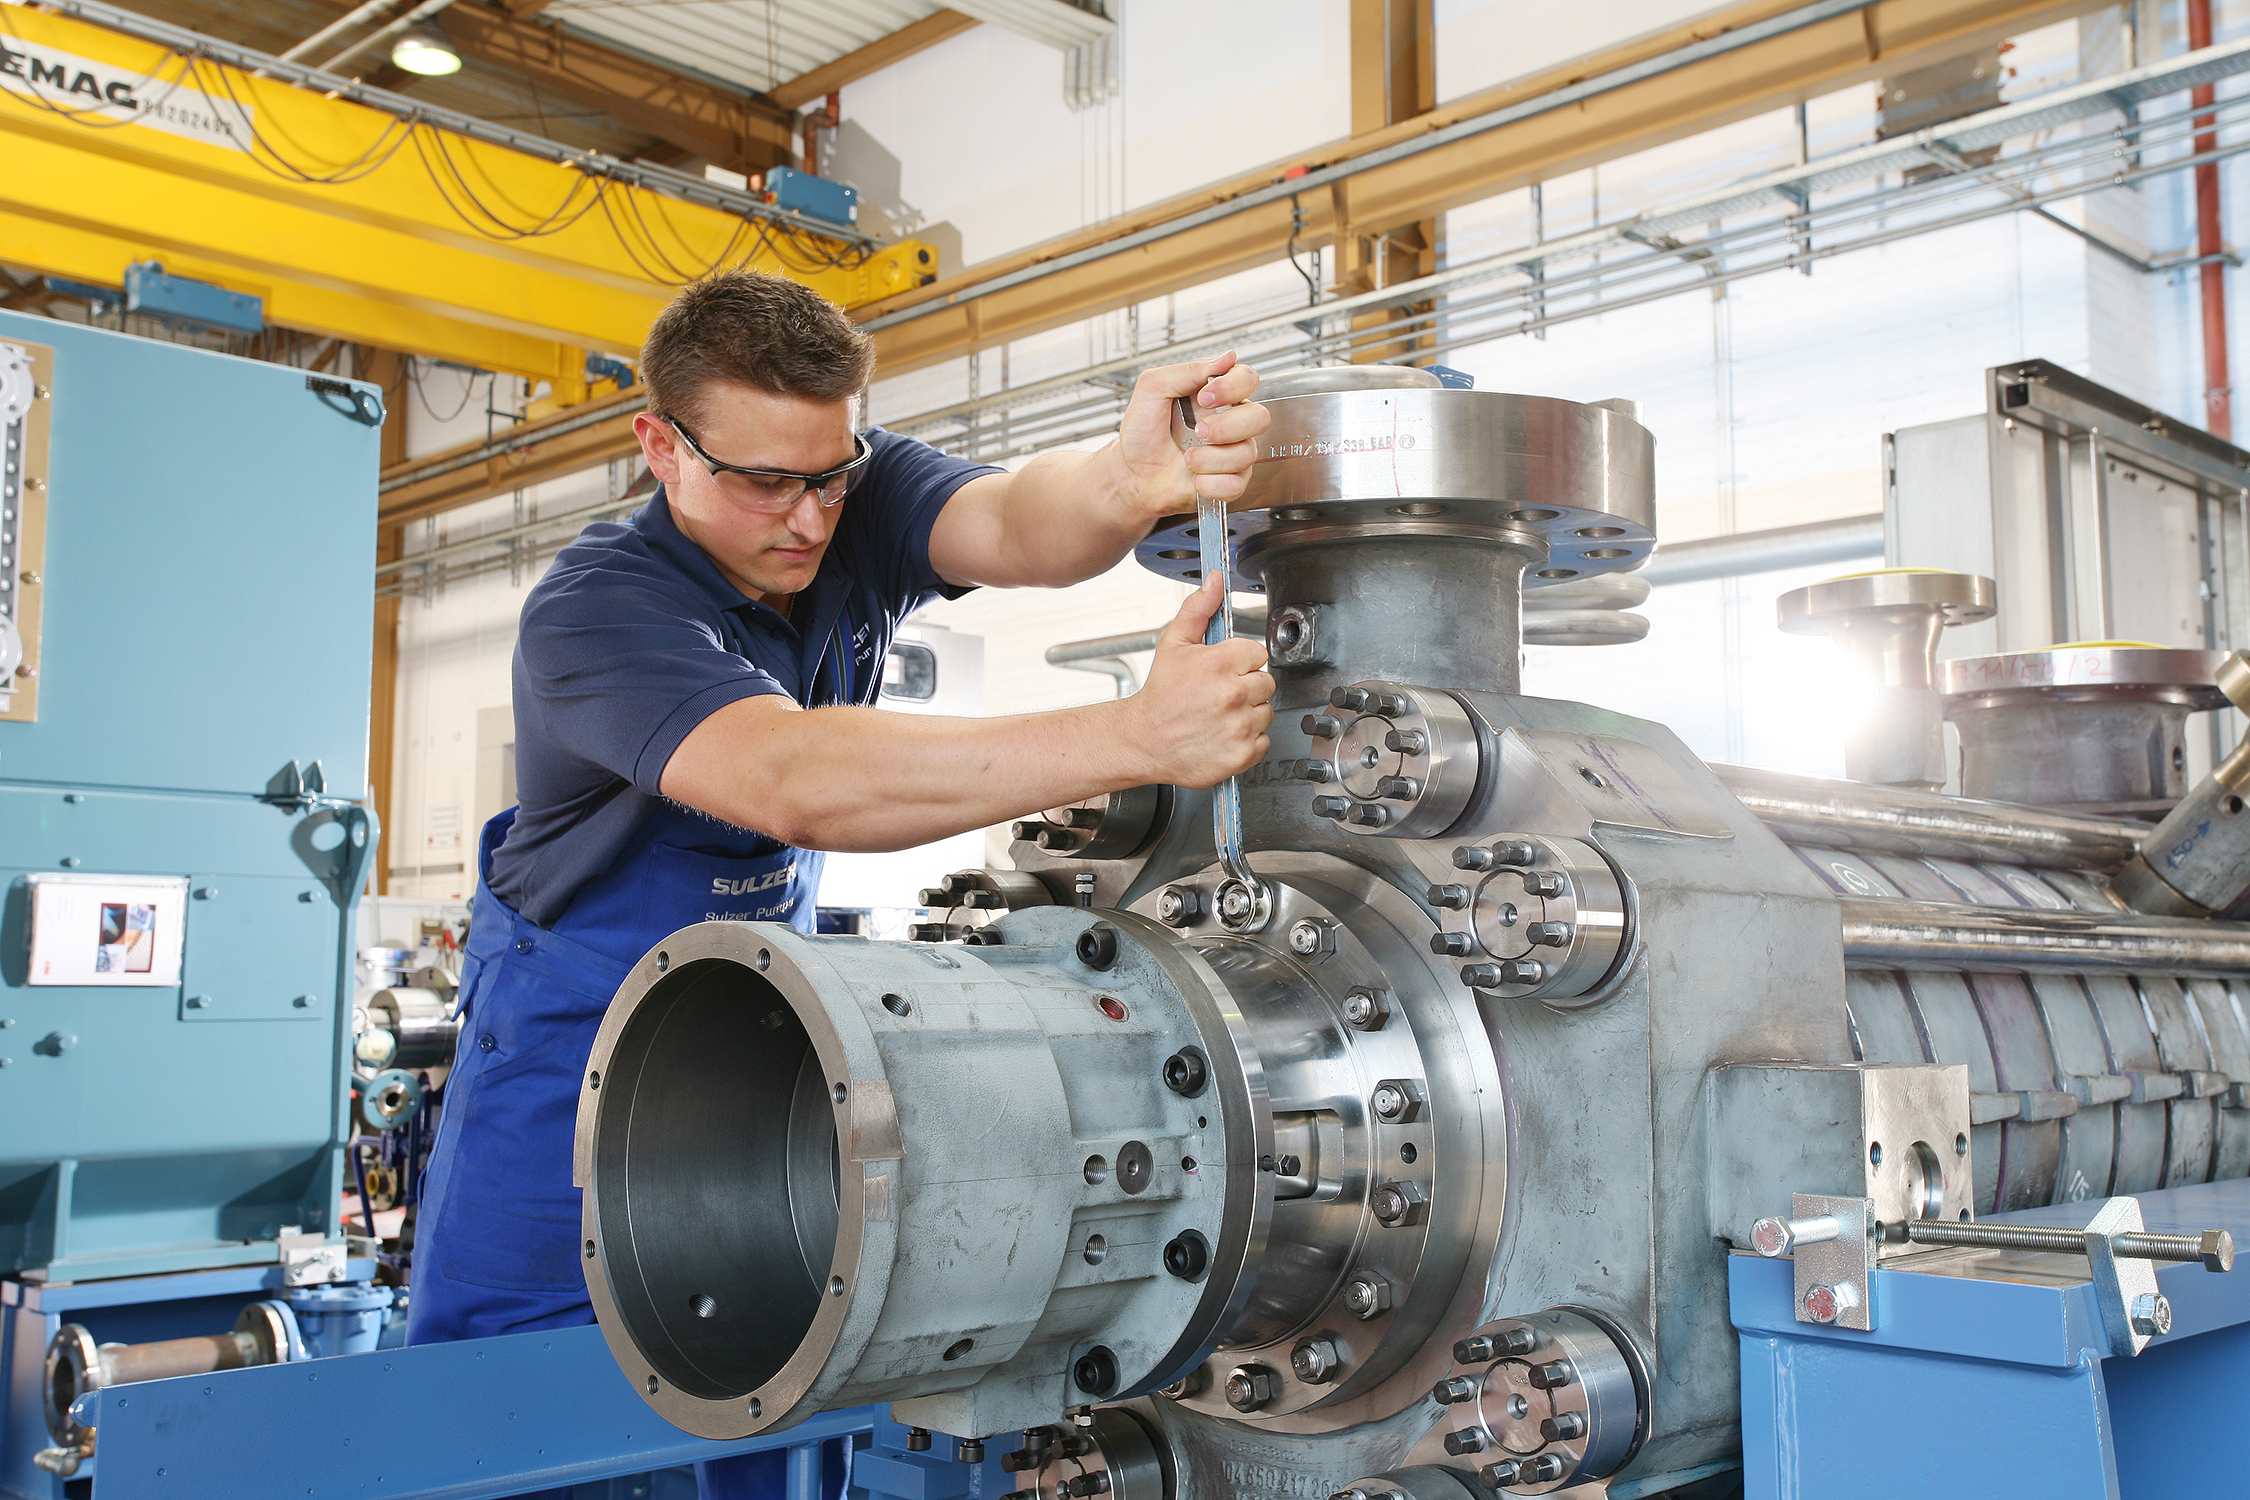 Sulzer’s new purpose-built facility in Middelfart is designed to optimise workflows.